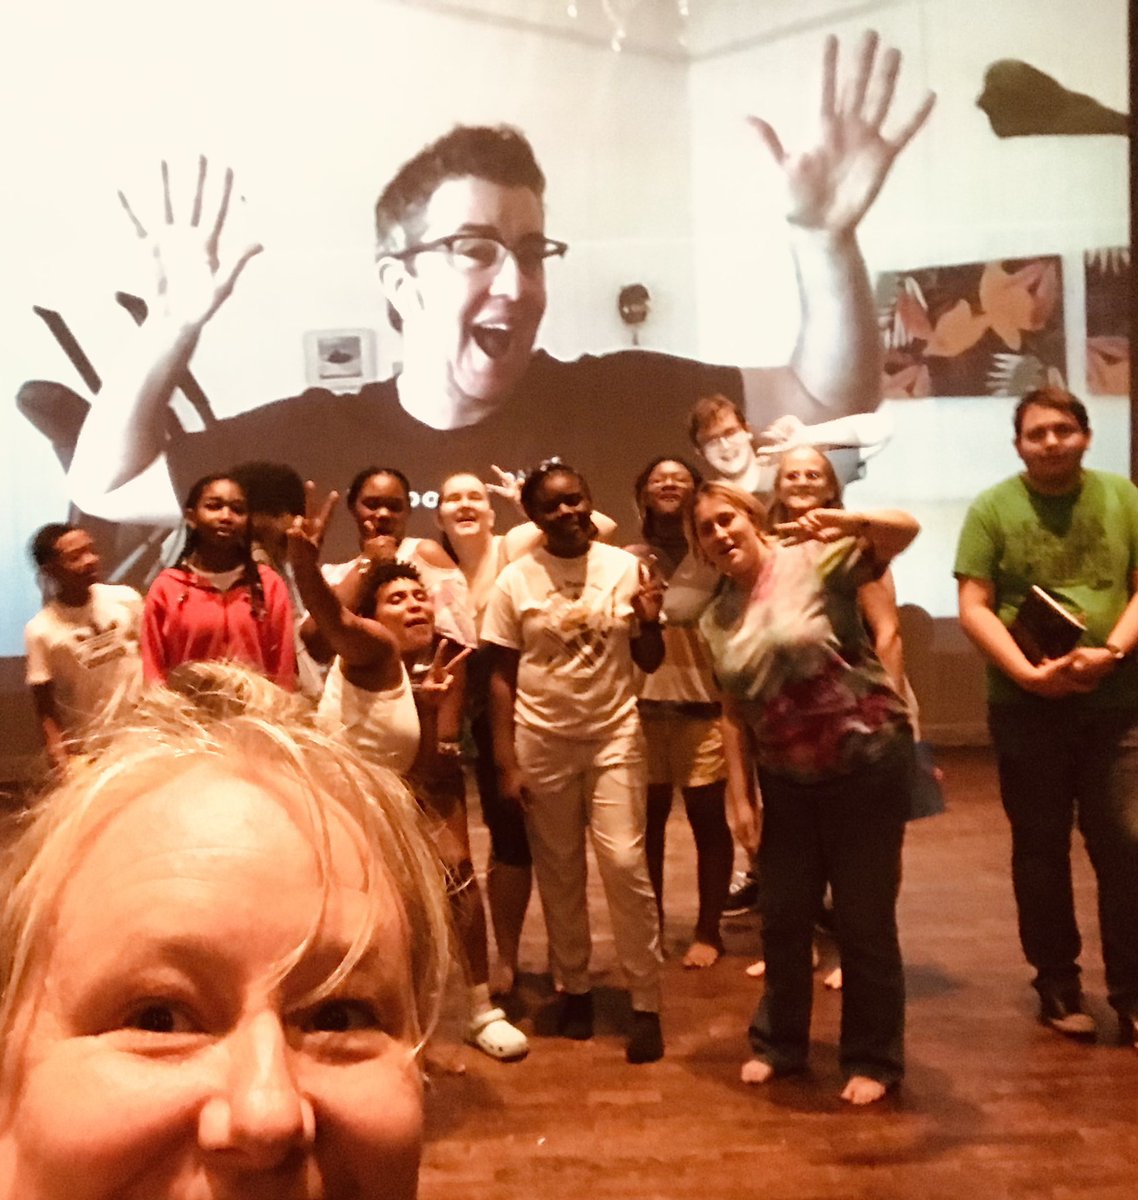 Sean teaching in Atlanta! ✴... leading a DREAM LAB! ✨Sean was thrilled to lead a 'DREAM LAB' workshop on Zoom with this incredible group of young folks, part of Youth Creates at @7StagesATL in Atlanta GA! Thank you to @NEFA_Boston and @NPNarts for making this tour possible!💛